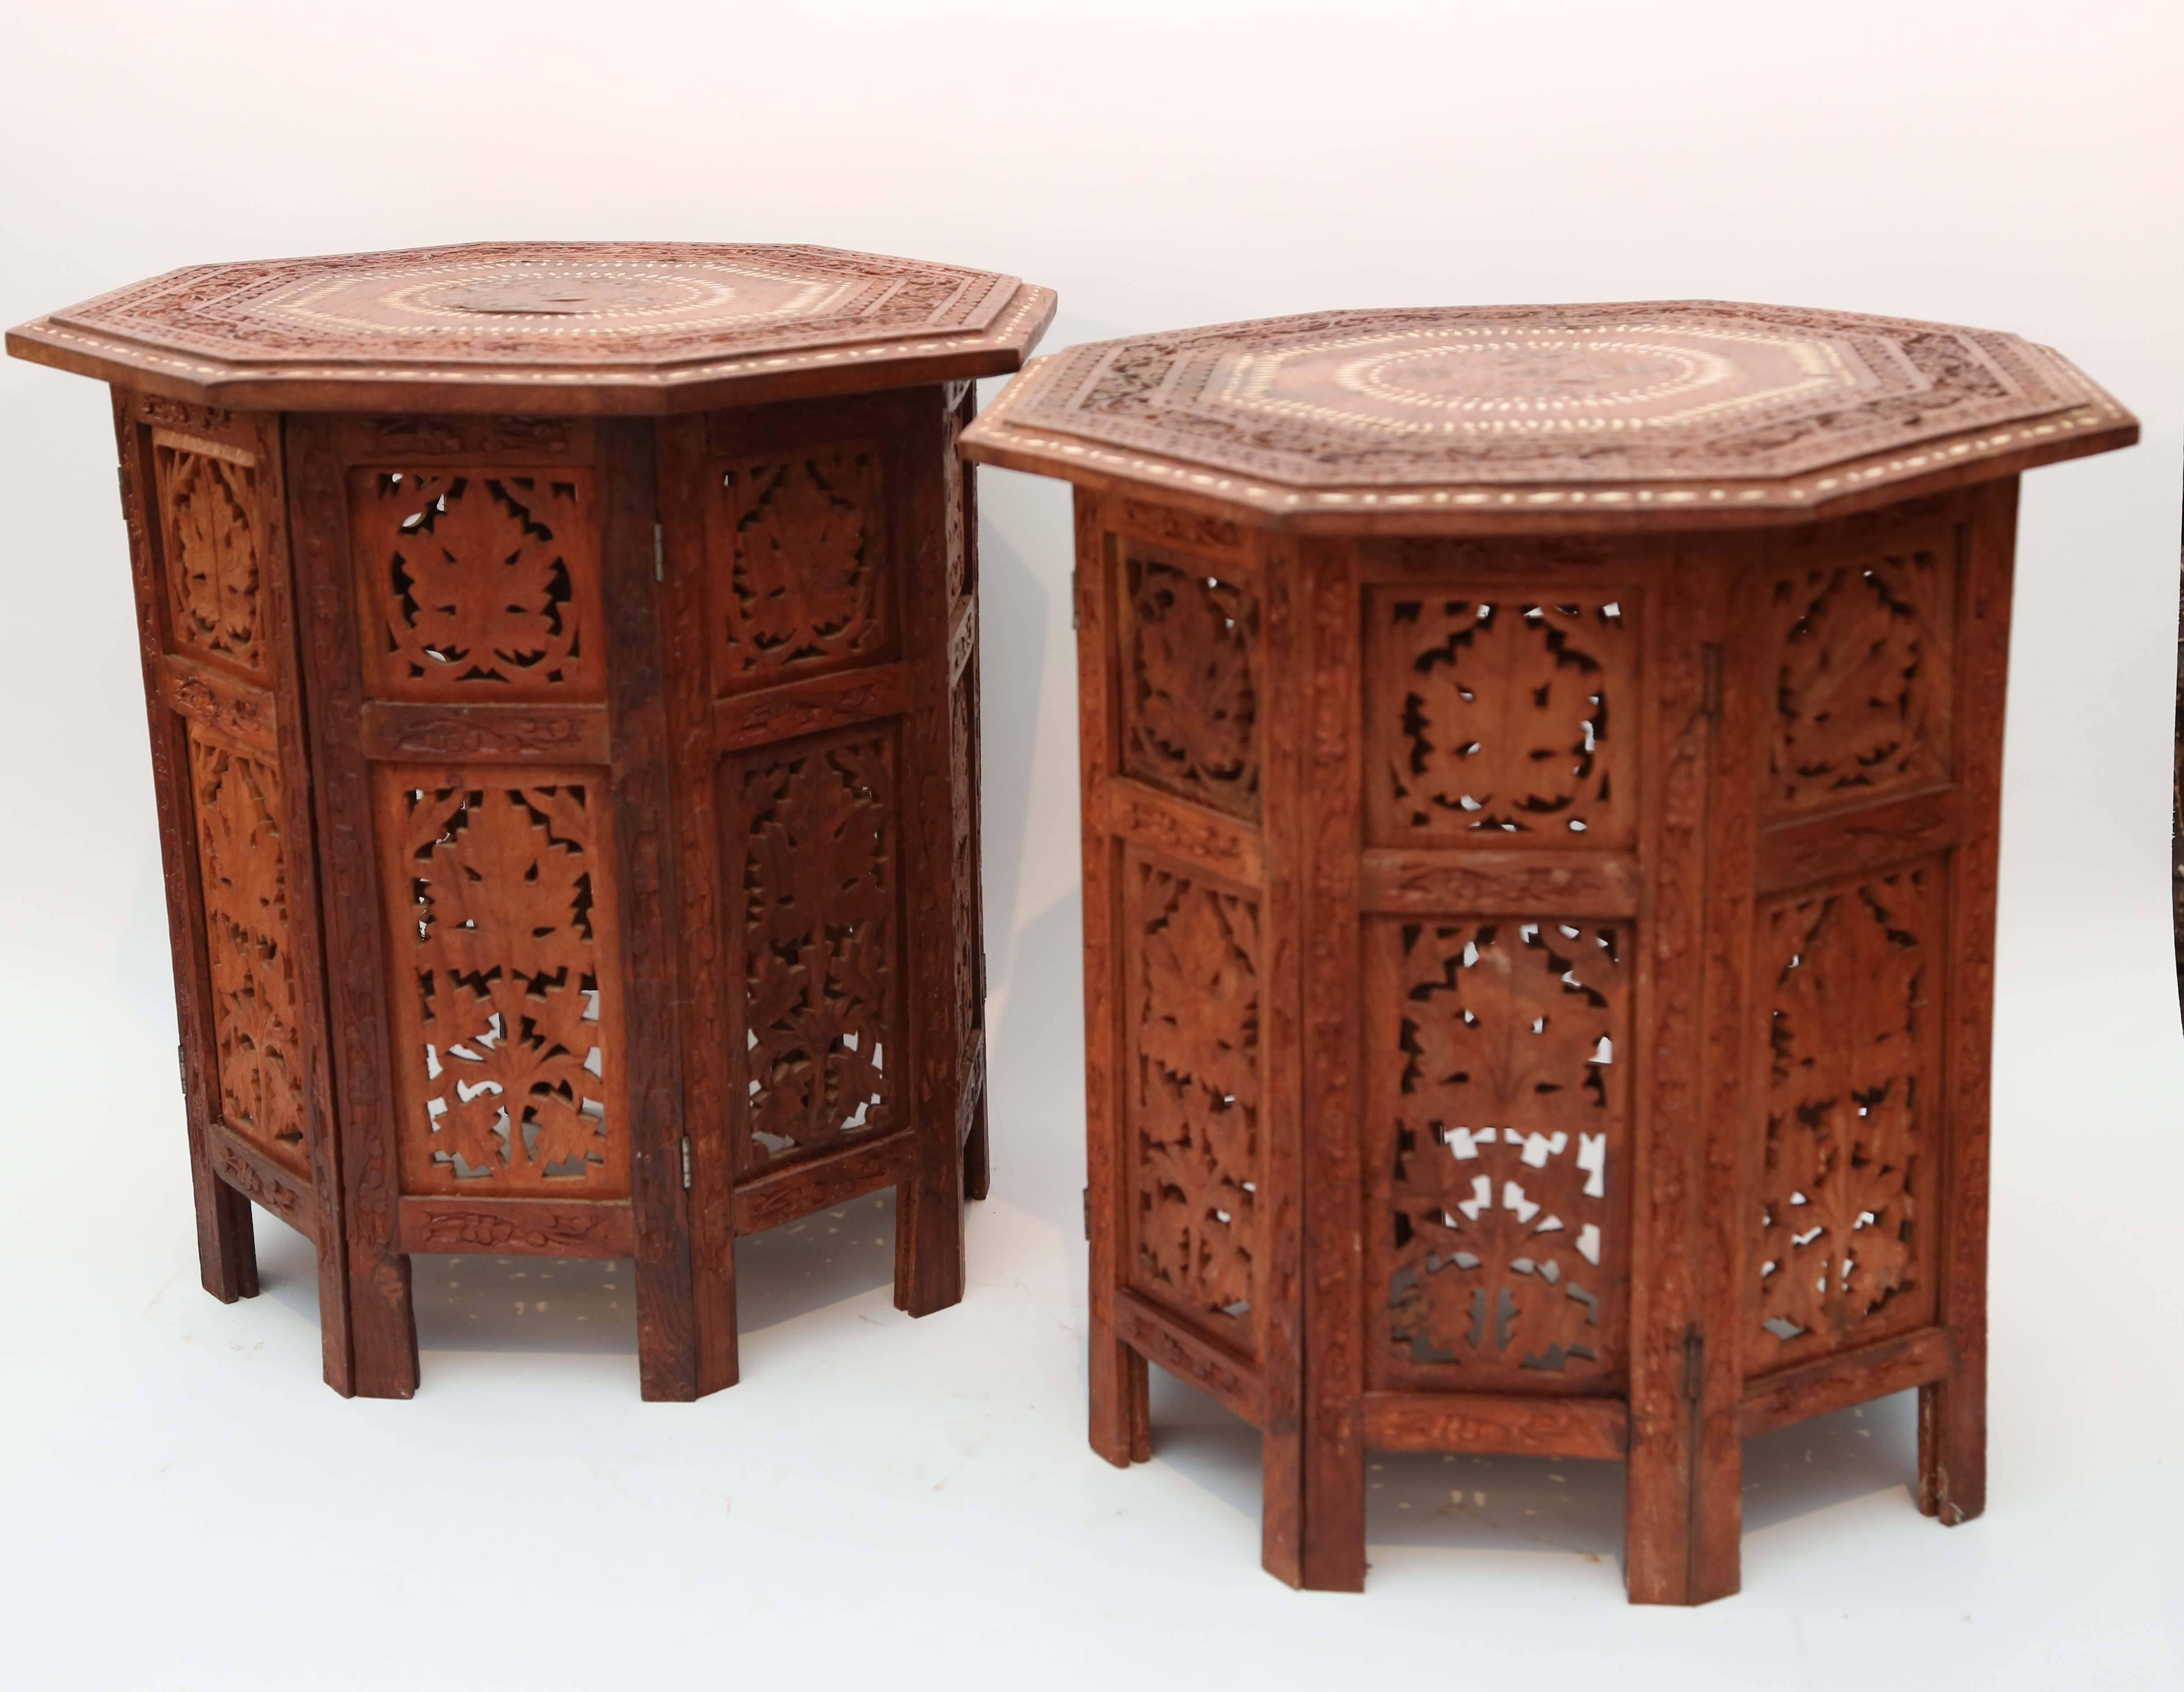 All-over carved with fine detail and floral inlaid tops.